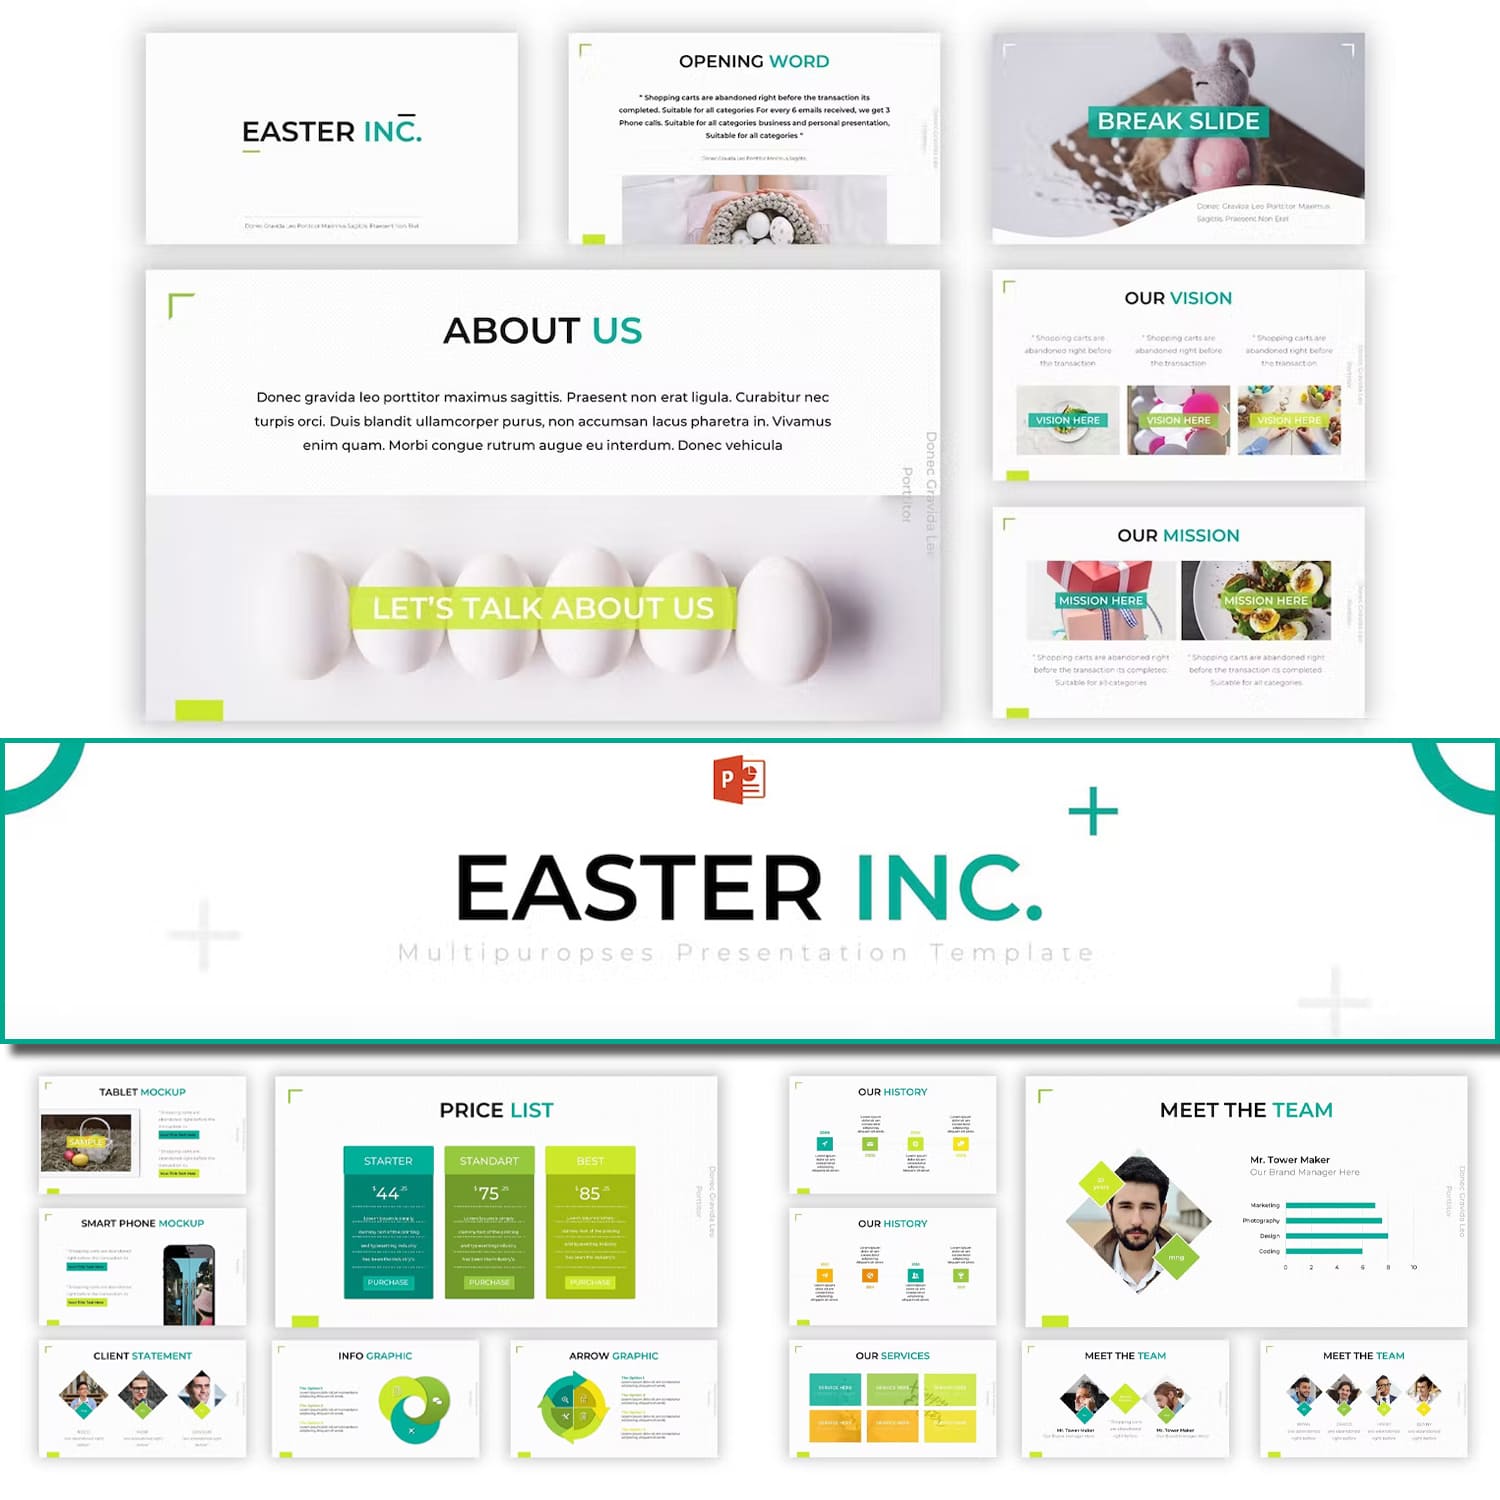 Easter inc powerpoint template from SlideFactory.